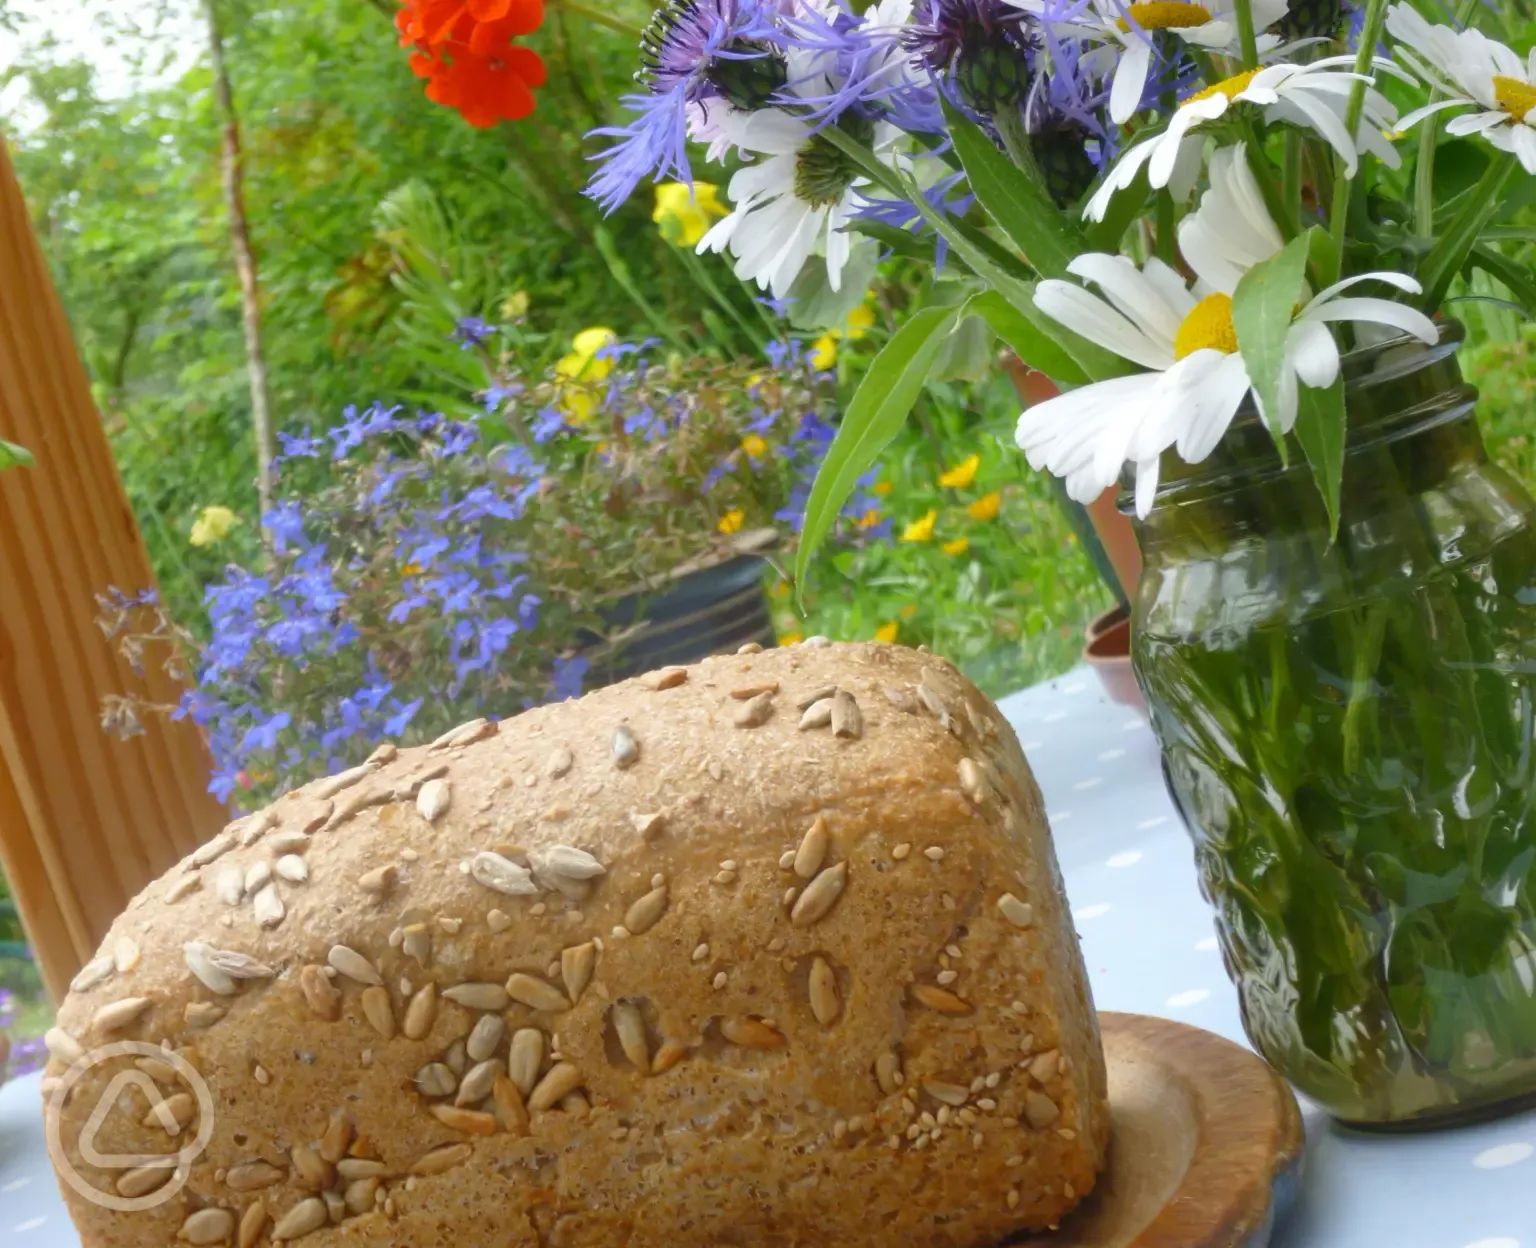 Try our delicious home-made organic wholemeal bread!